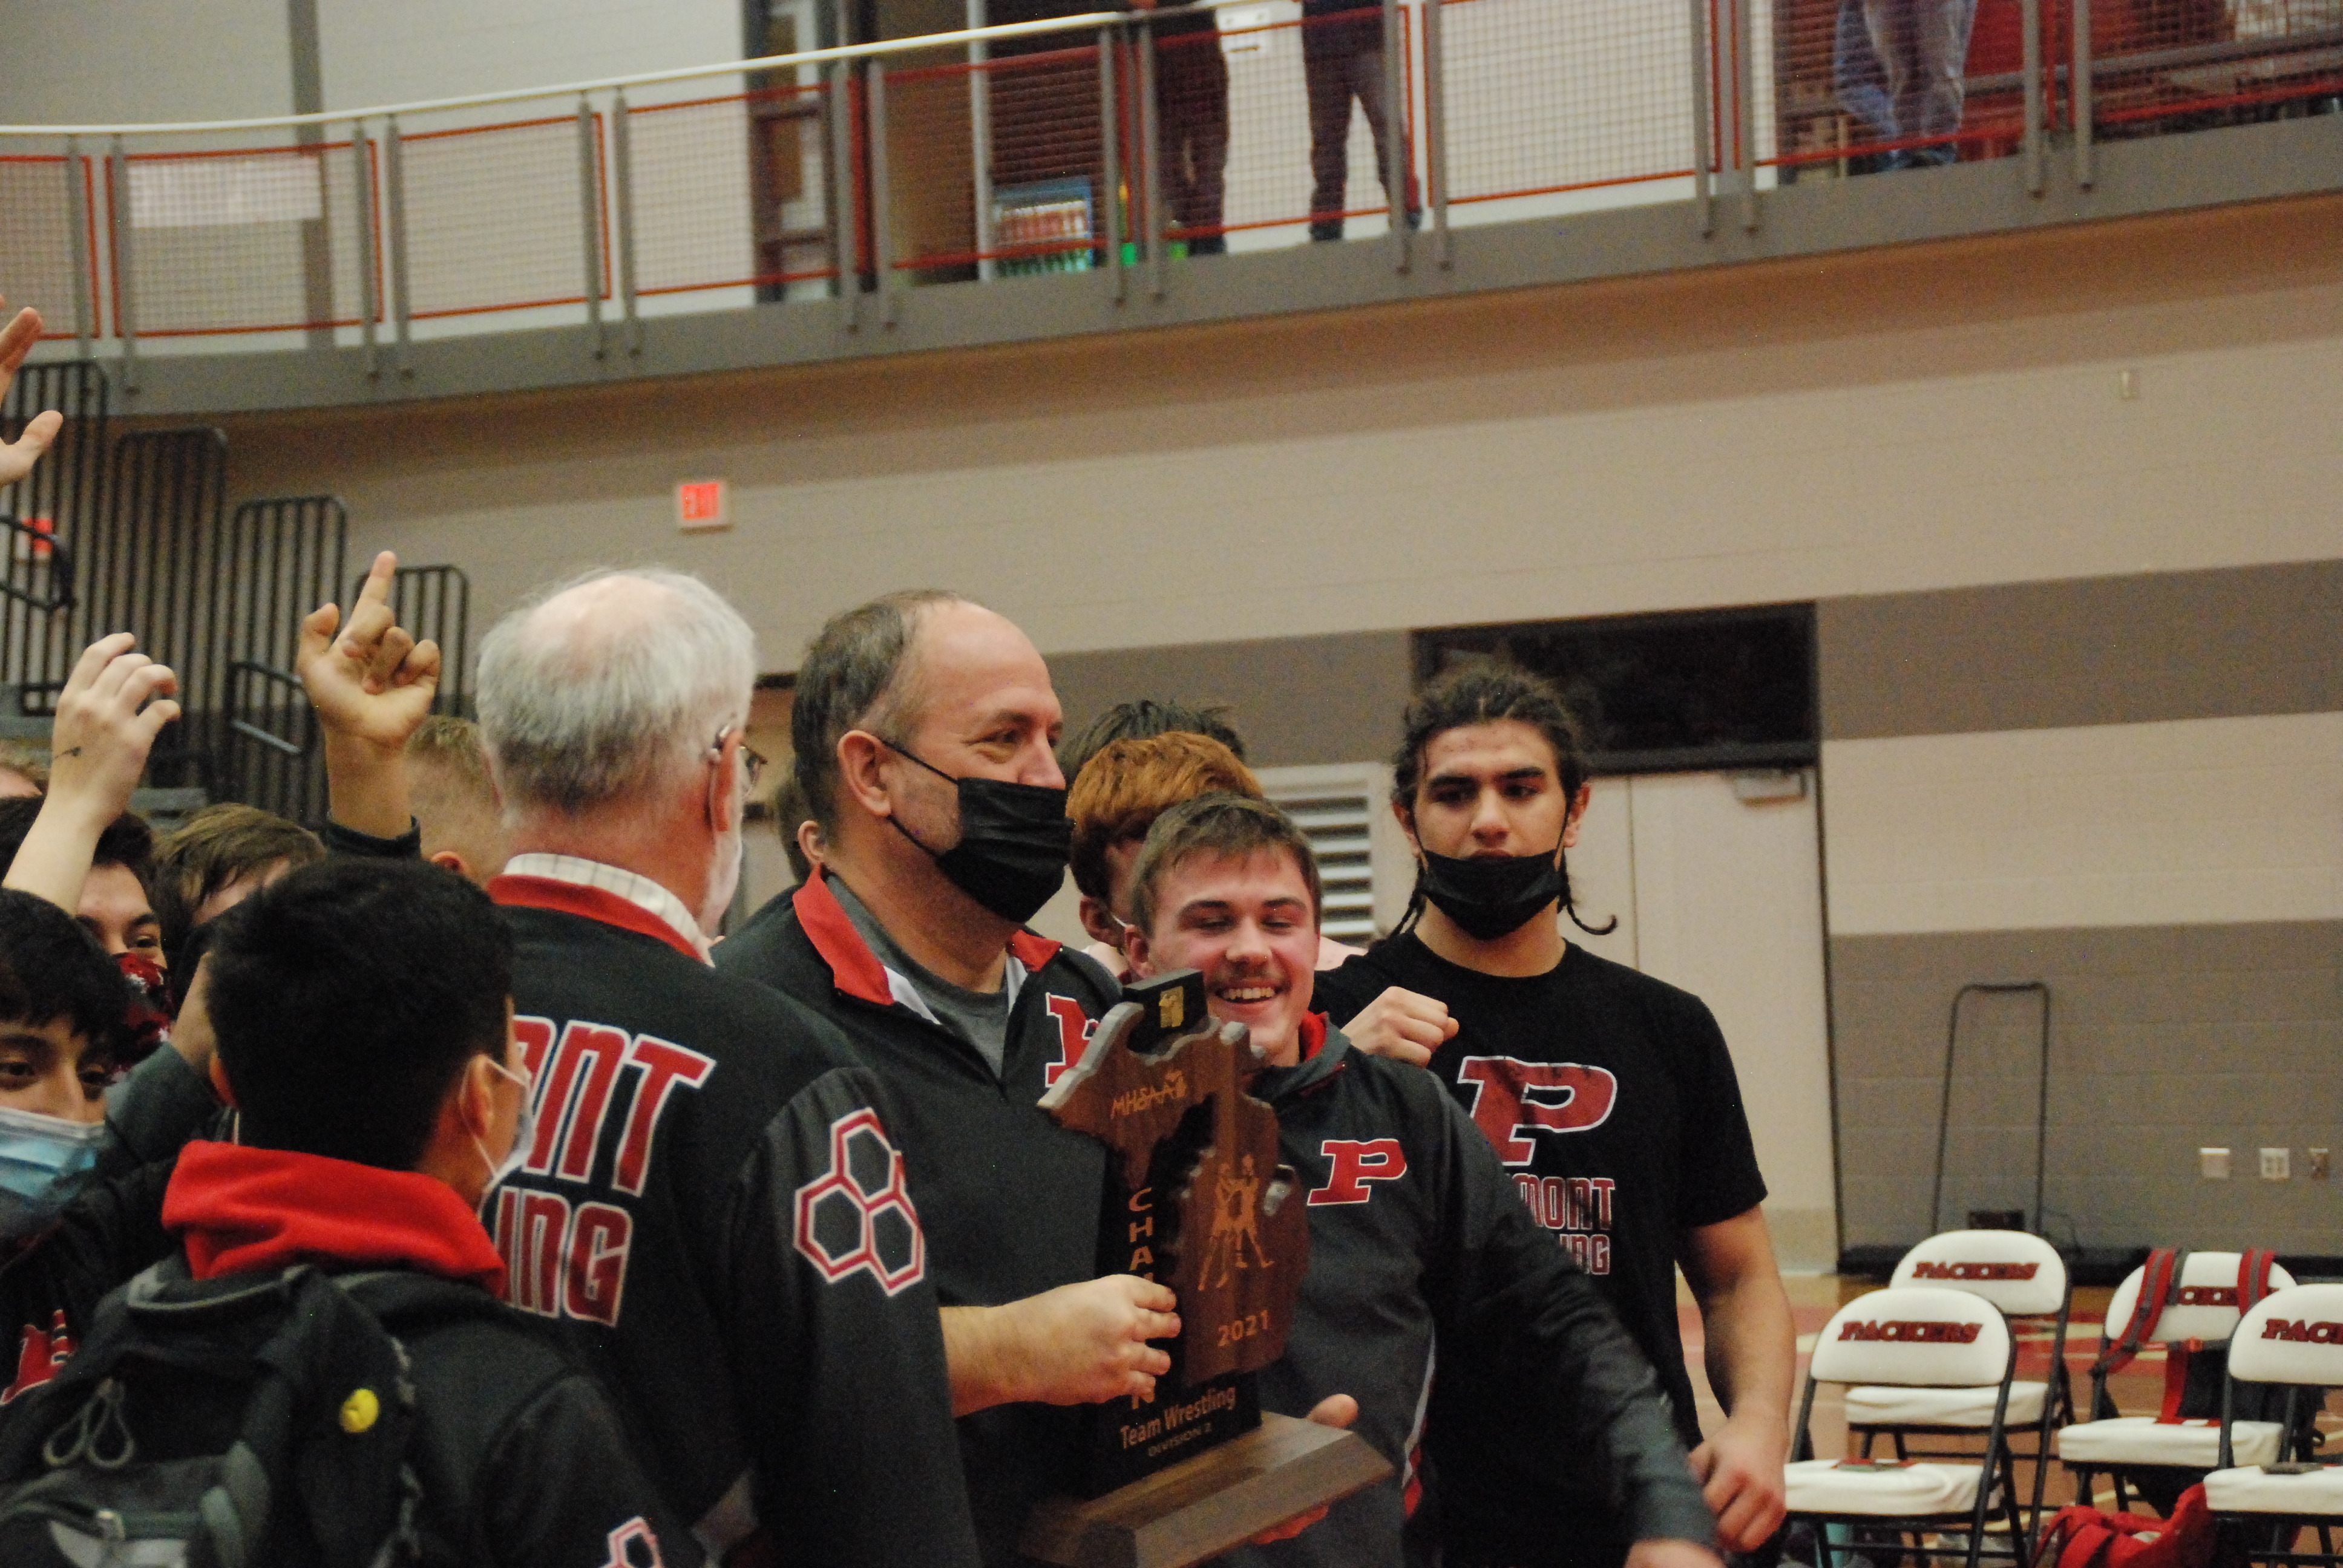 Craig Middle School wrestling pins down district title